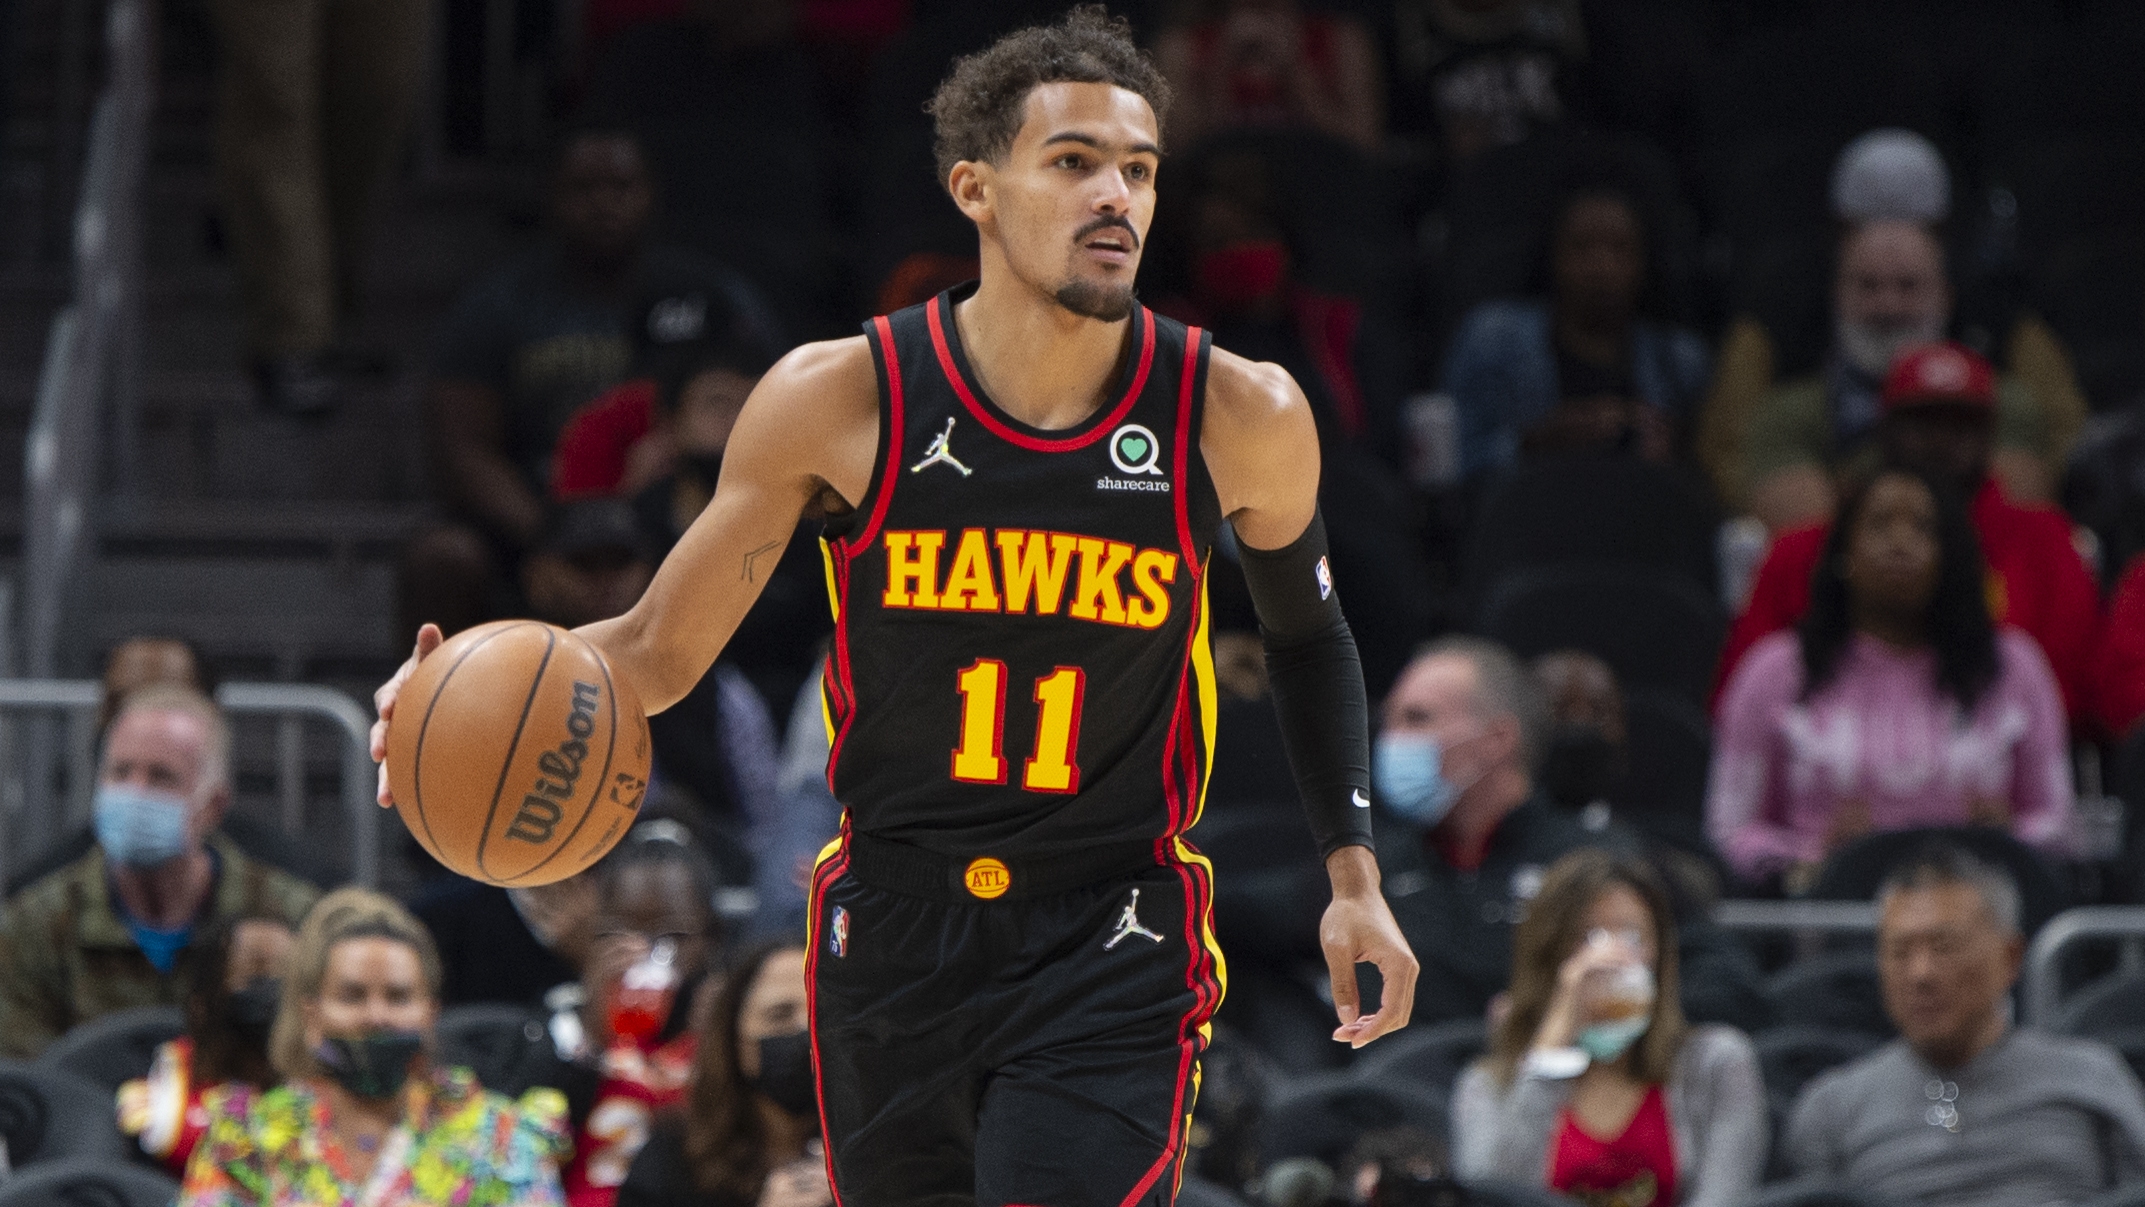 Hawks beat Wizards 114-99 for 7th straight win